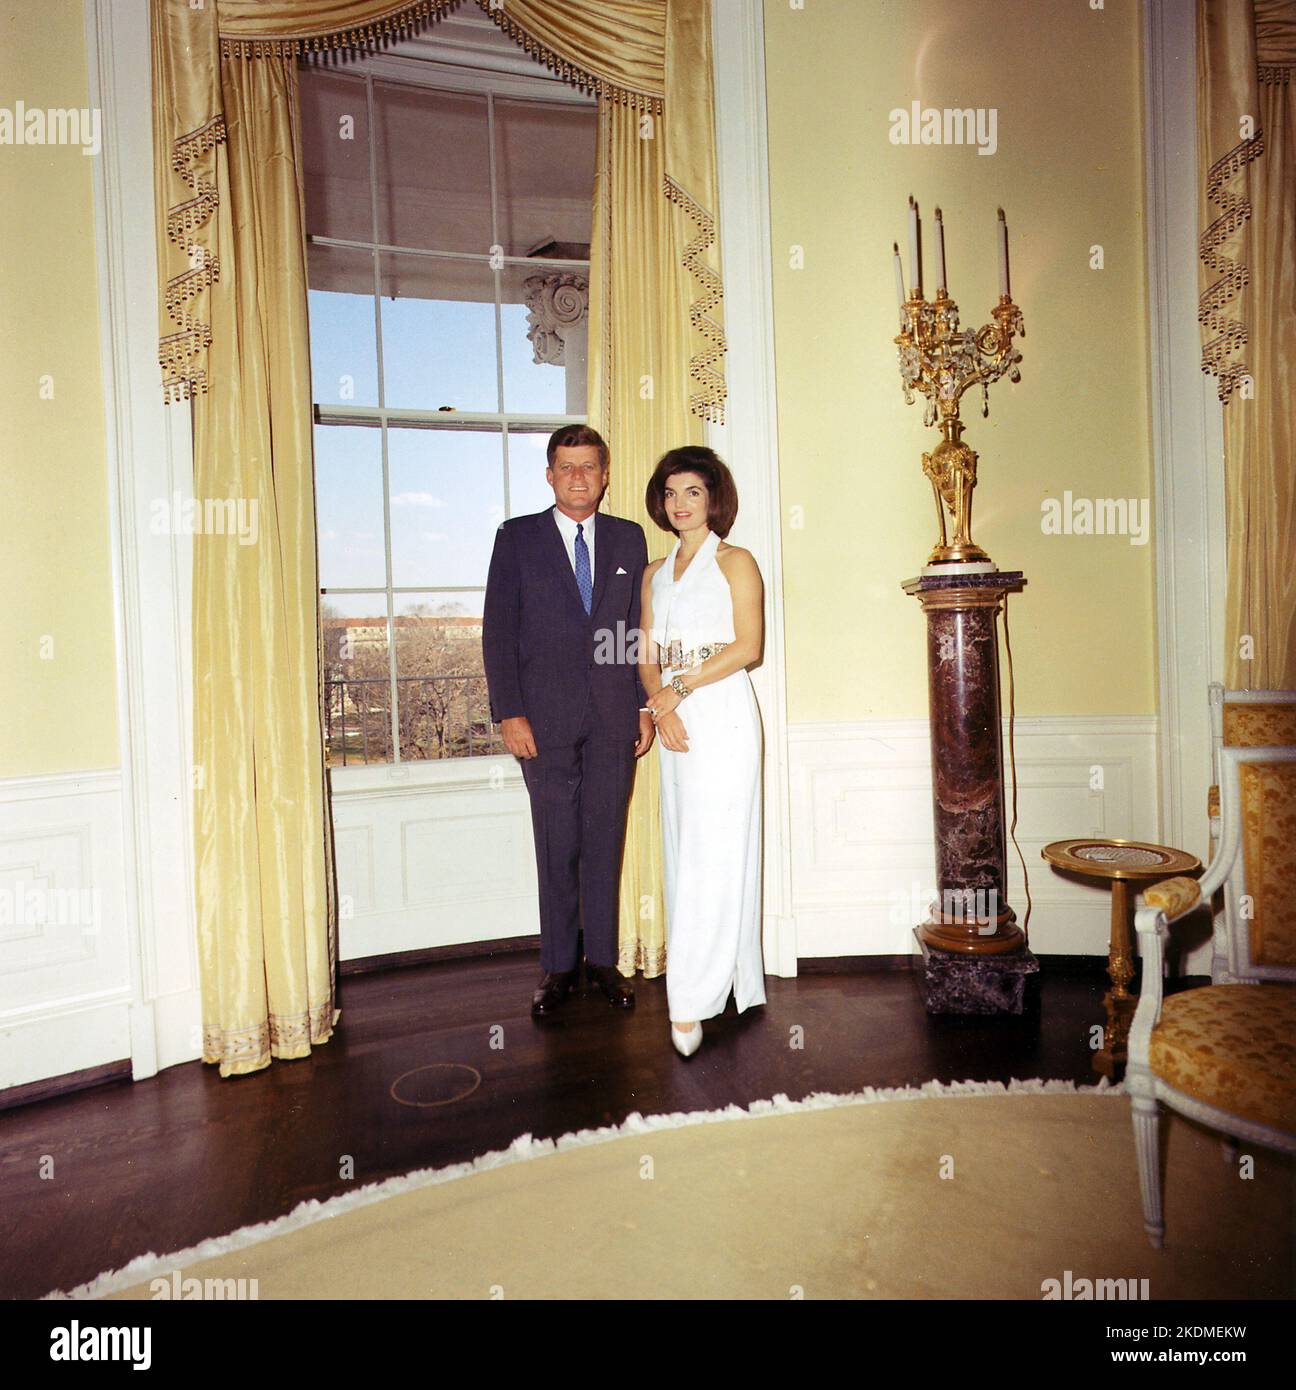 President and First Lady, Portrait Photograph. President Kennedy, Mrs. Kennedy. White House, Yellow Oval Room. Cecil (Cecil William) Stoughton, 1920-2008, Photographer. Stock Photo